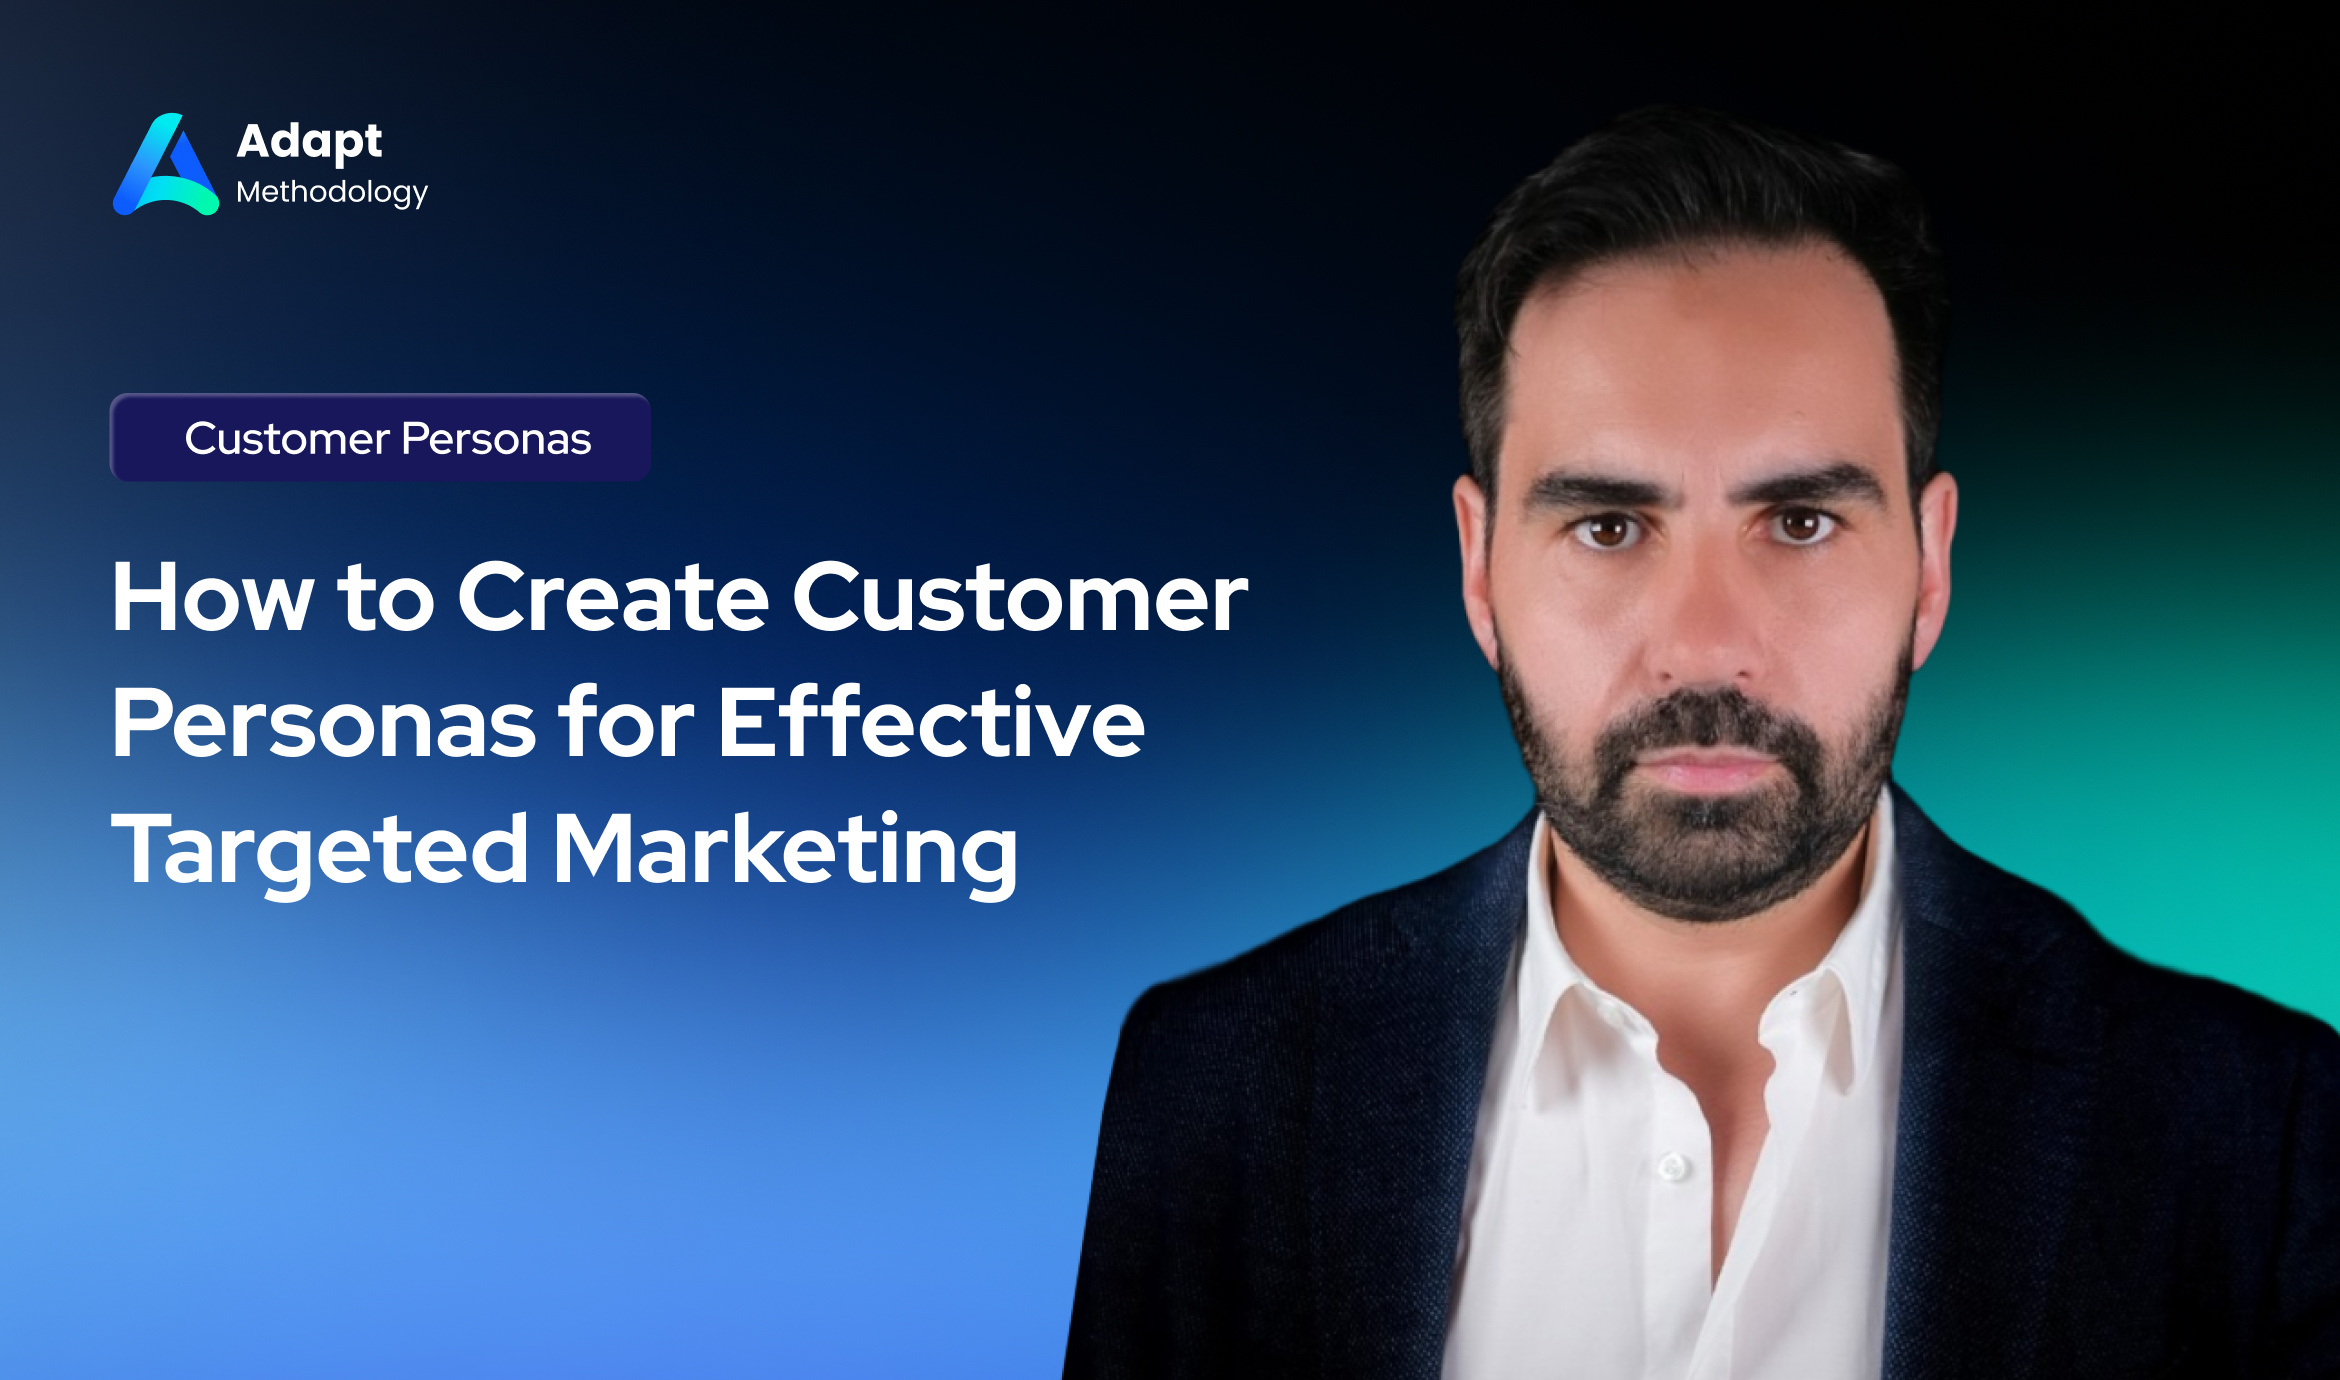 How to Create Customer Personas for Effective Targeted Marketing